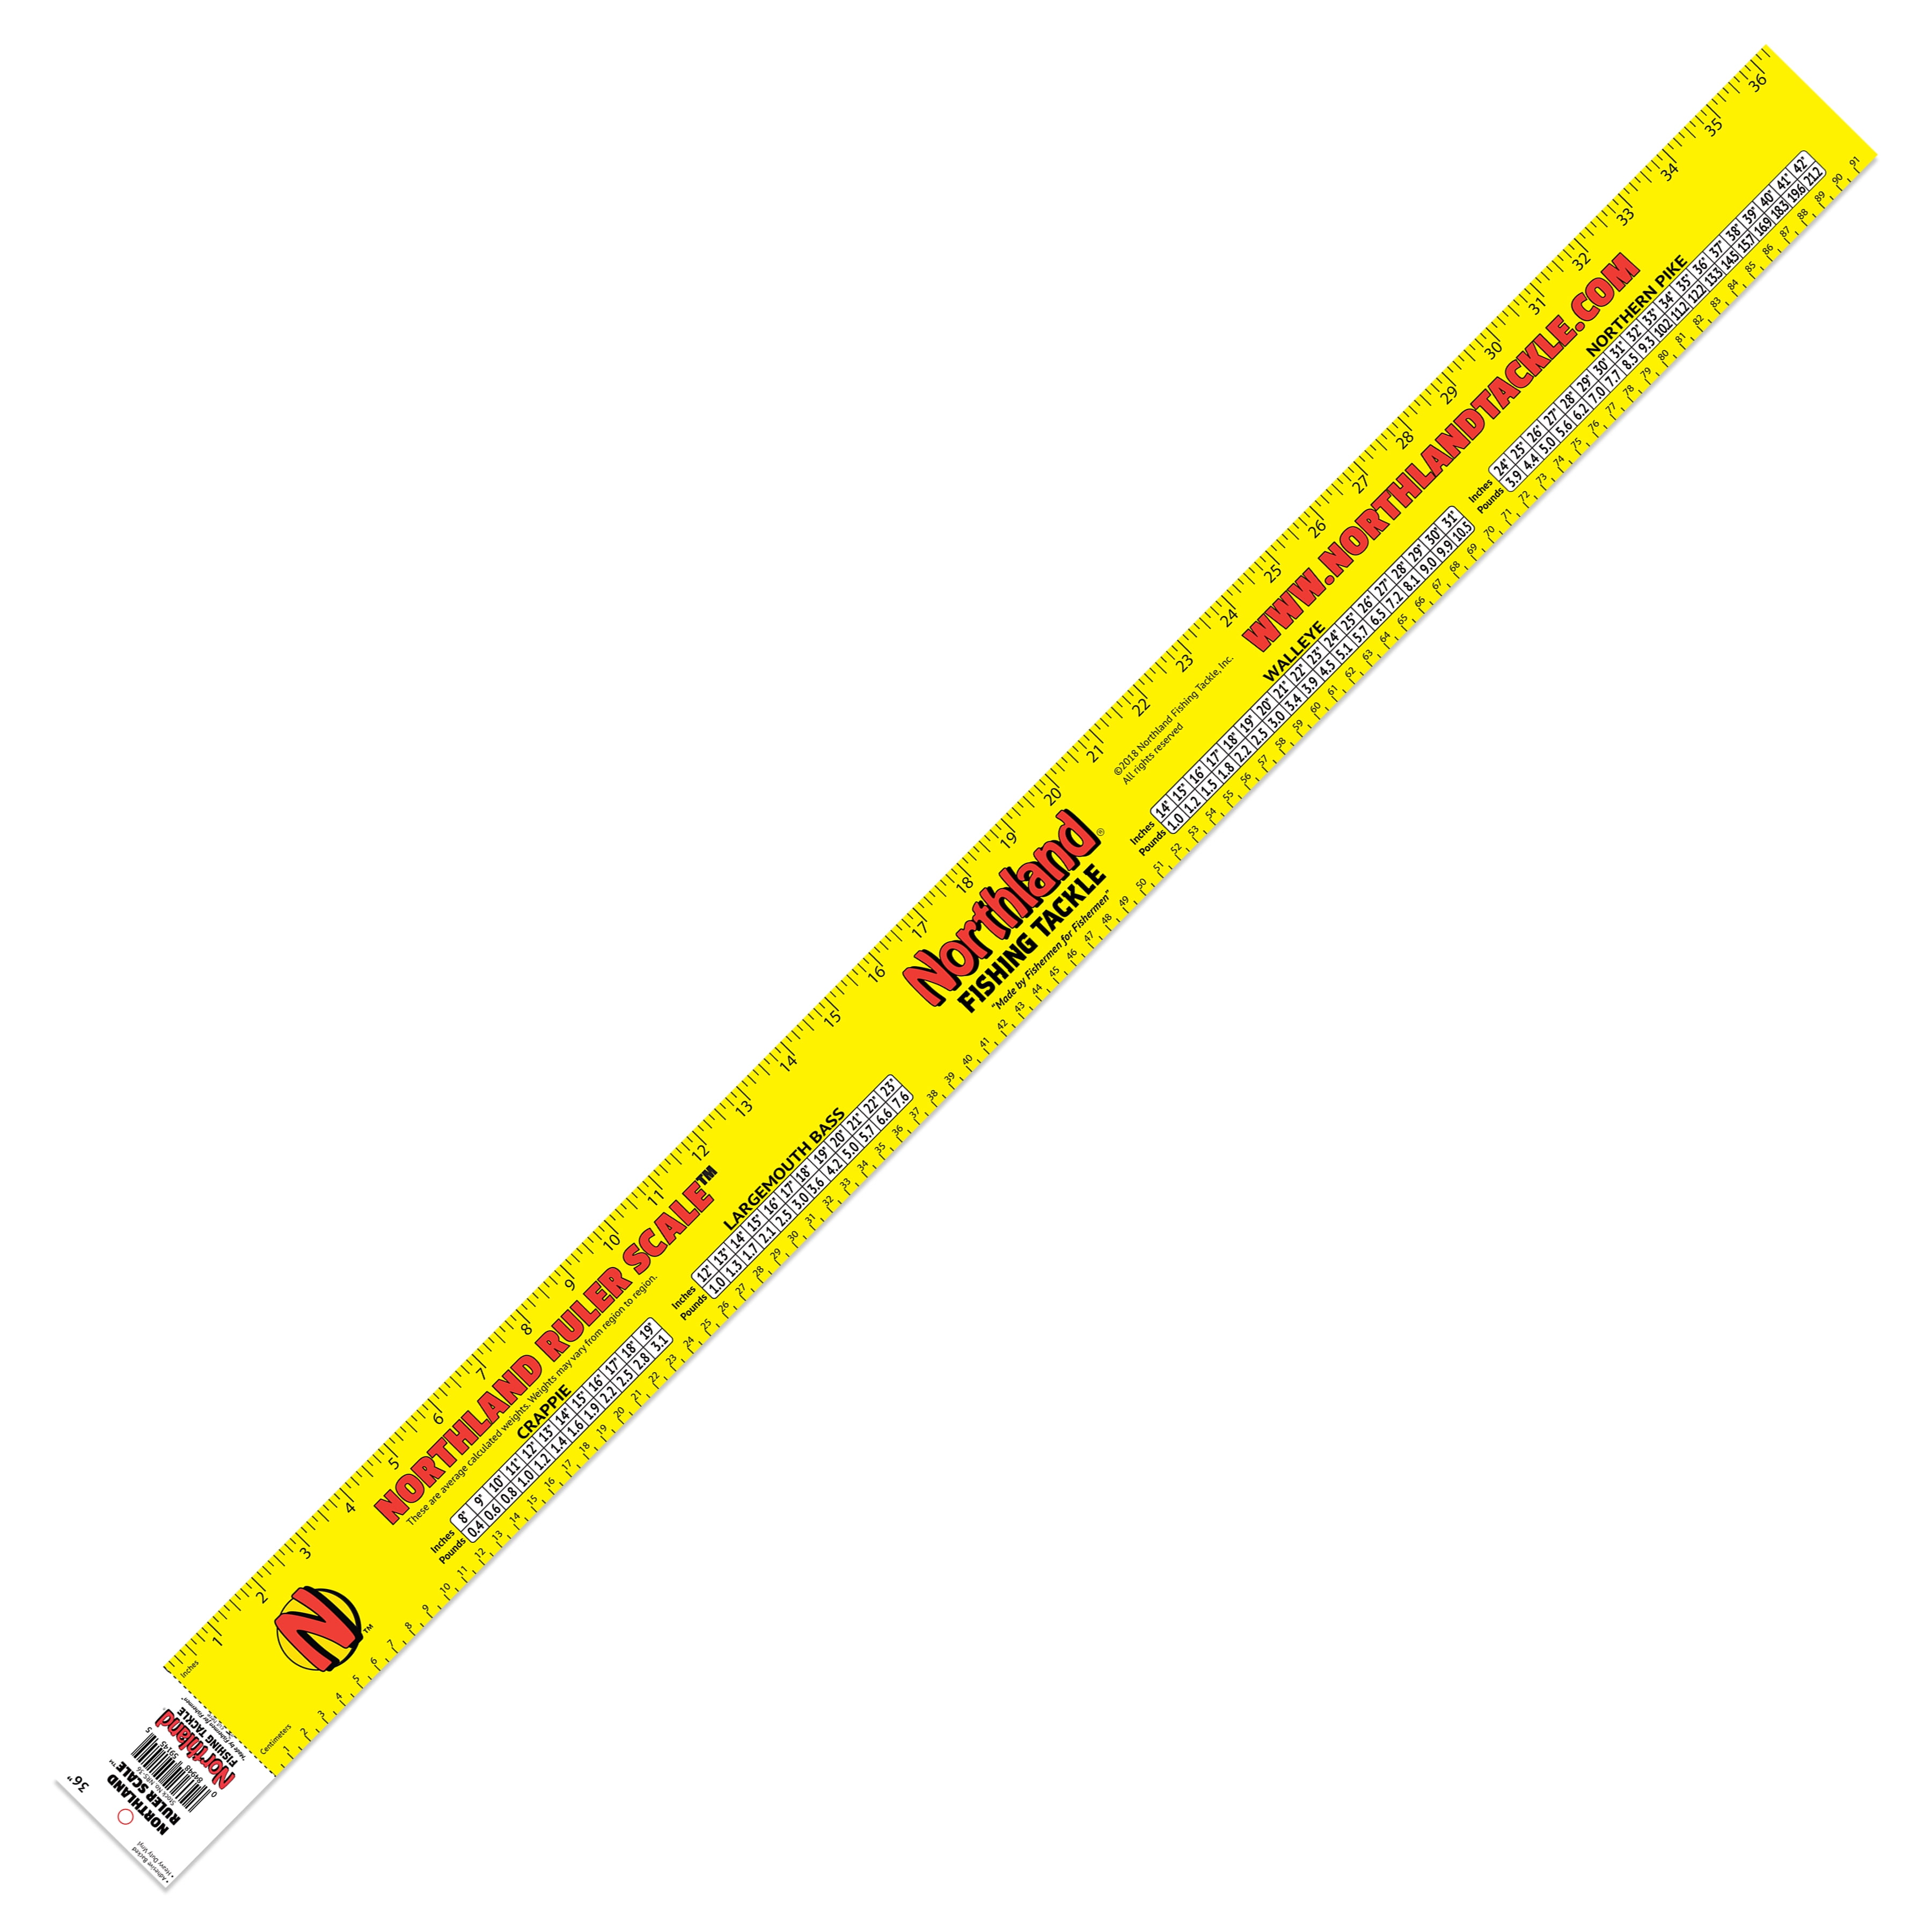 Northland Tackle Ruler Scale Sticker, Freshwater, Yellow, Measuring Device